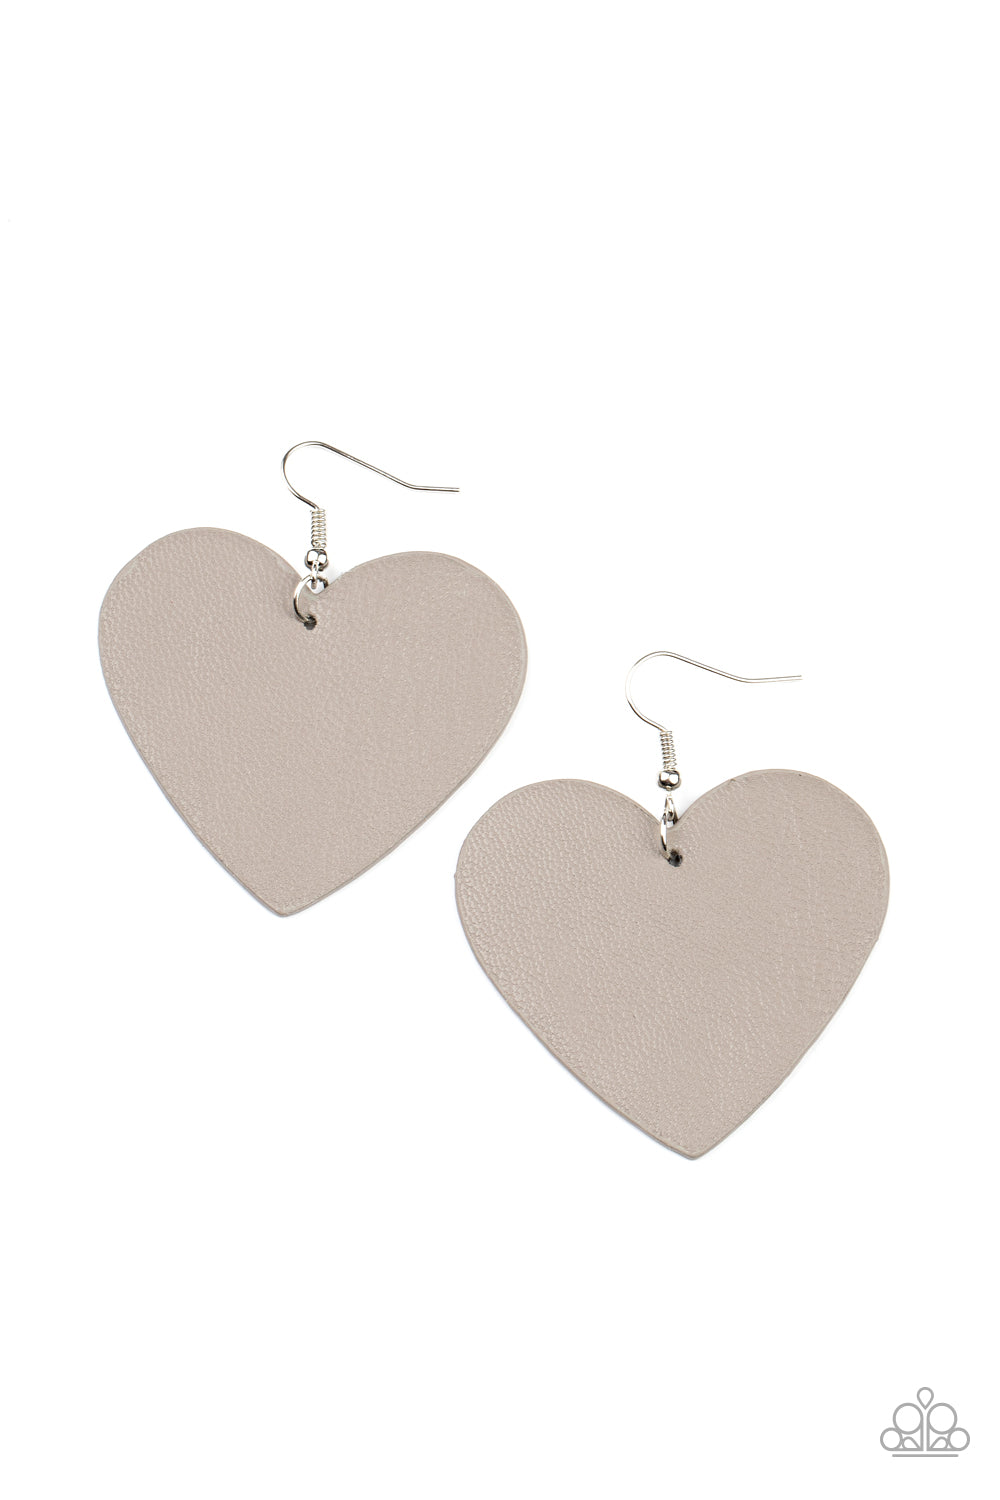 Country Crush - Silver Earrings